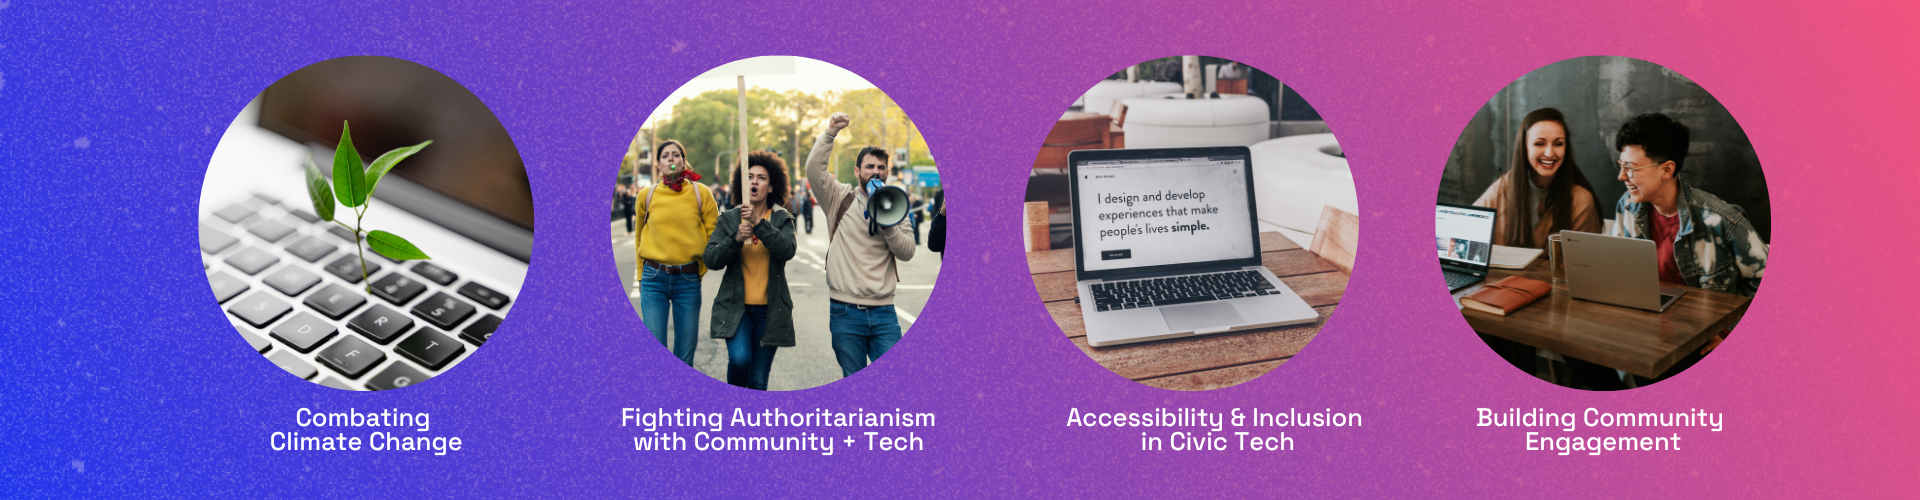 Composite of images representing four themes which are: 1 - Combating Climate Change. 2 - Fighting Authoritarianism with Community + Tech. 3 - Accessibility and Inclusion in Civic Tech. 4 - Building Community Engagement.